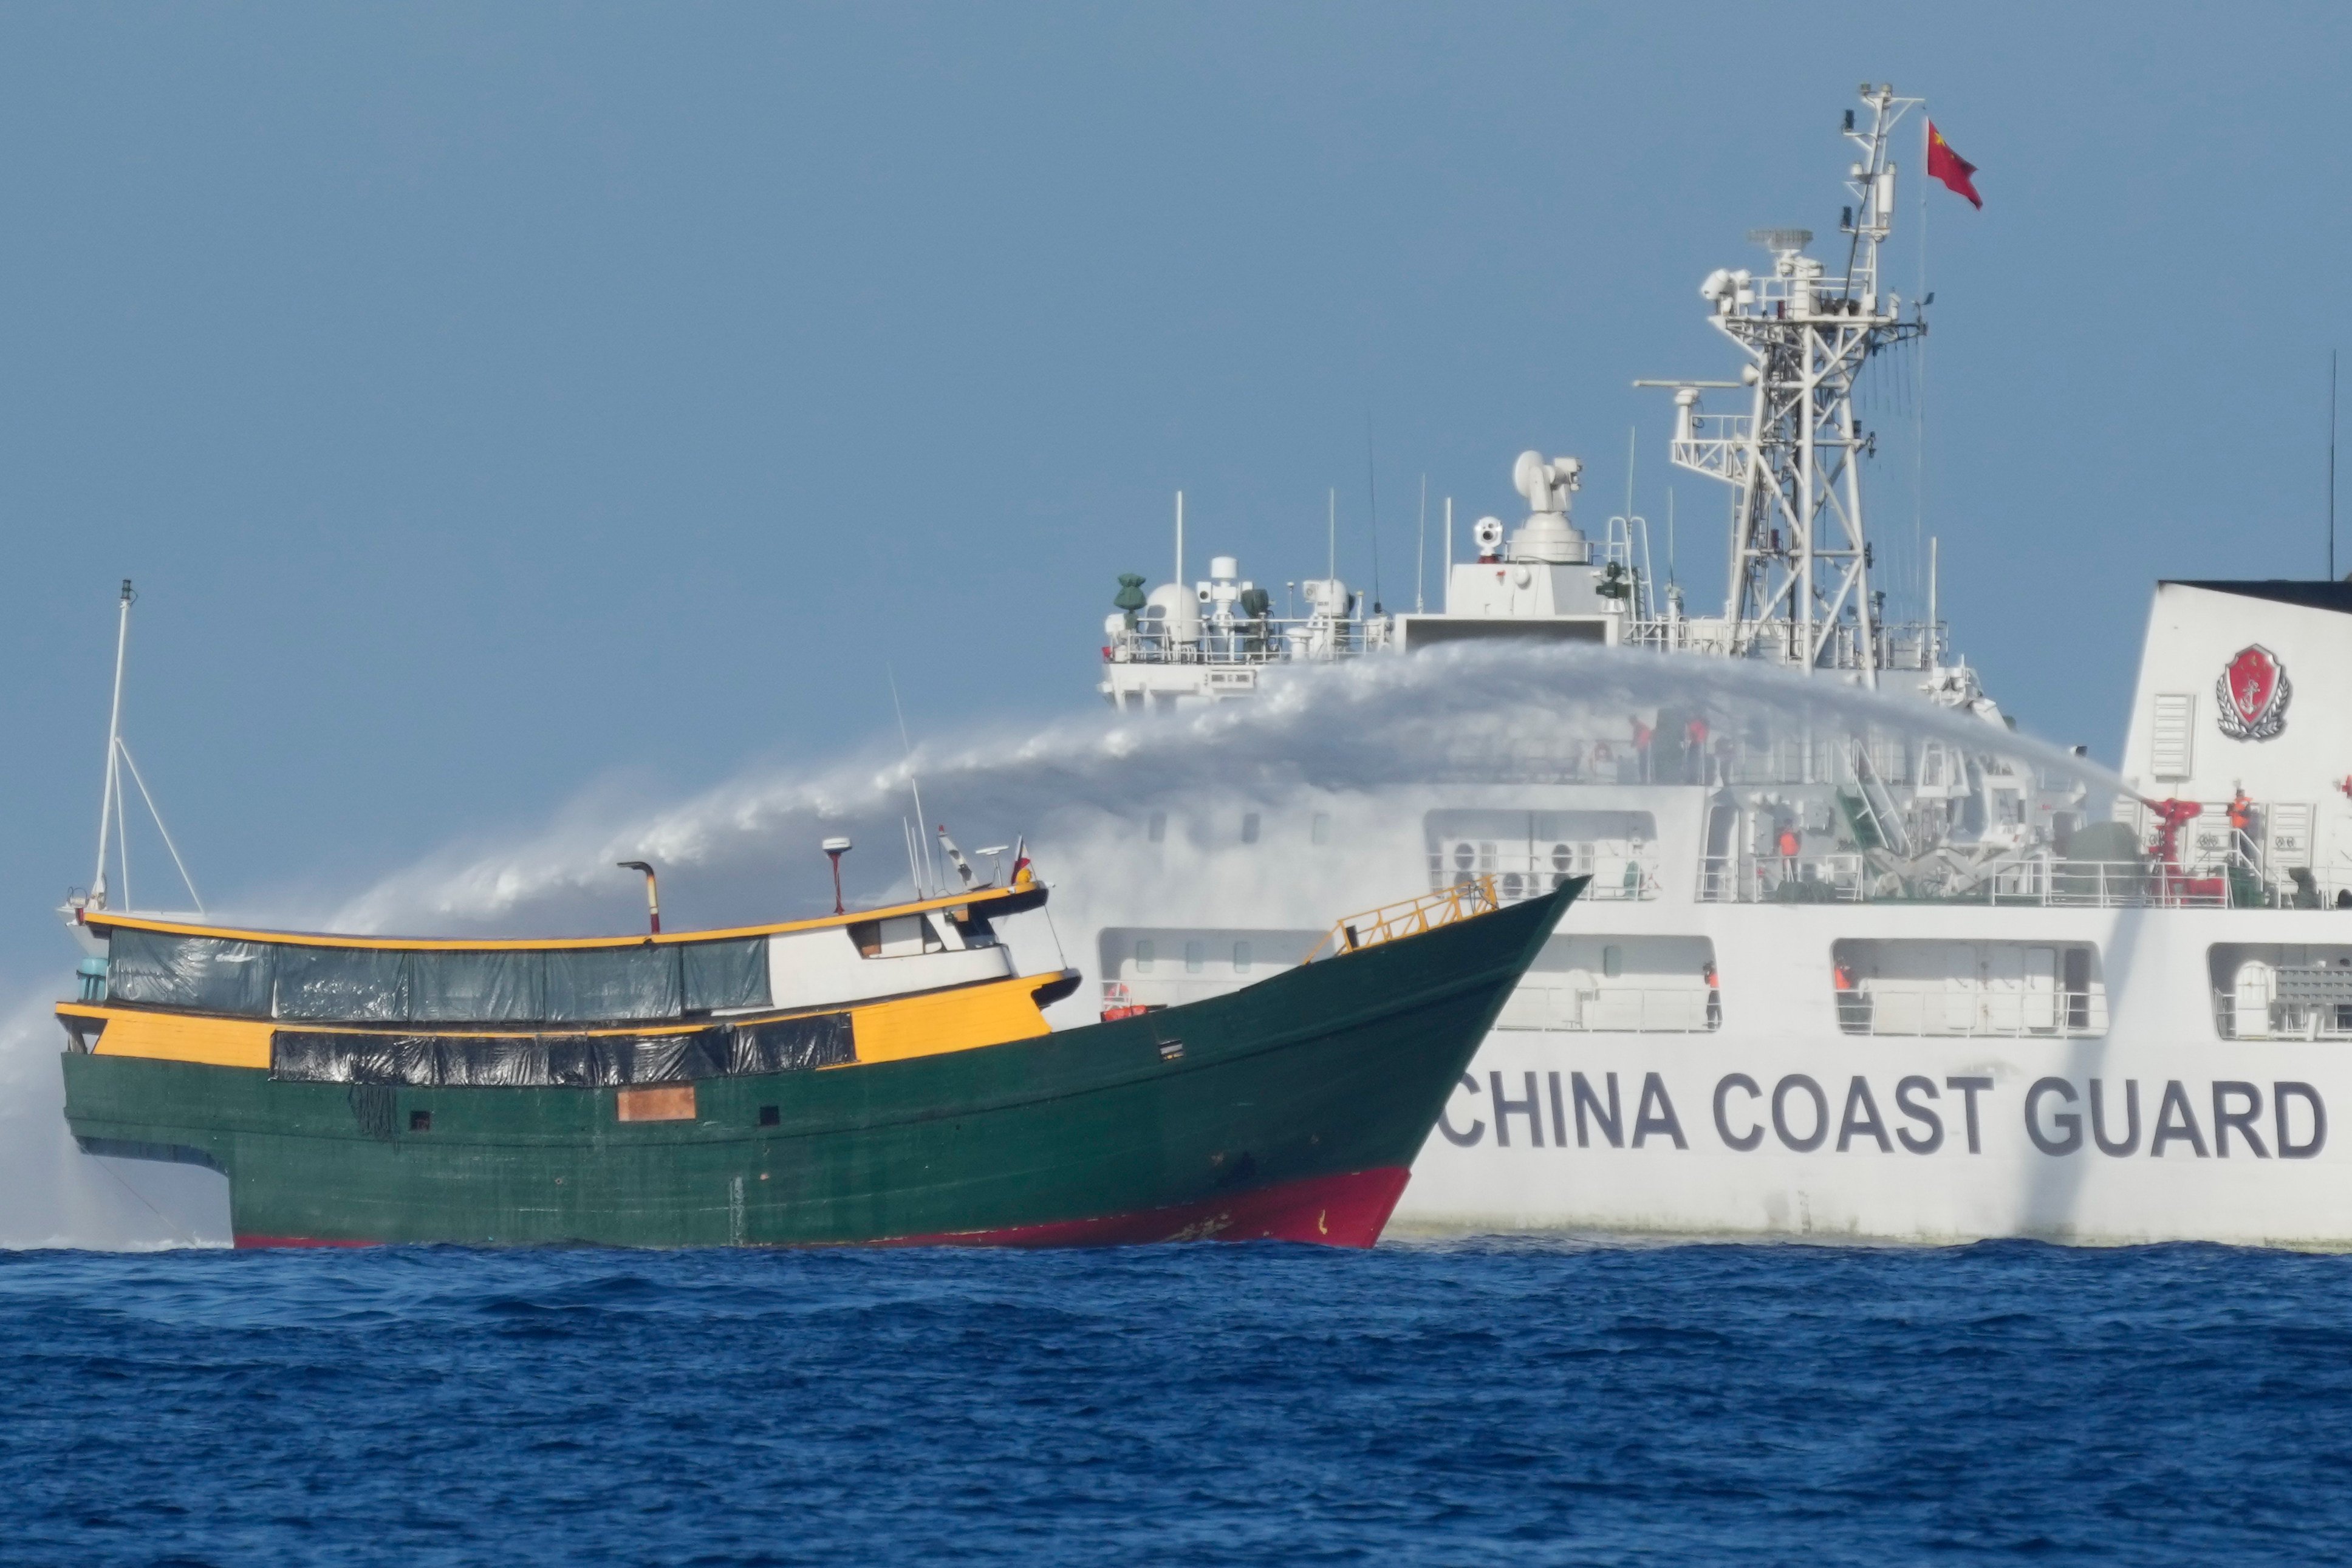 Philippine resupply vessel Unaizah May 4 hit by Chinese coastguard water canon blast as it tried to enter the Second Thomas Shoal in the disputed South China Sea in March. Photo: AP